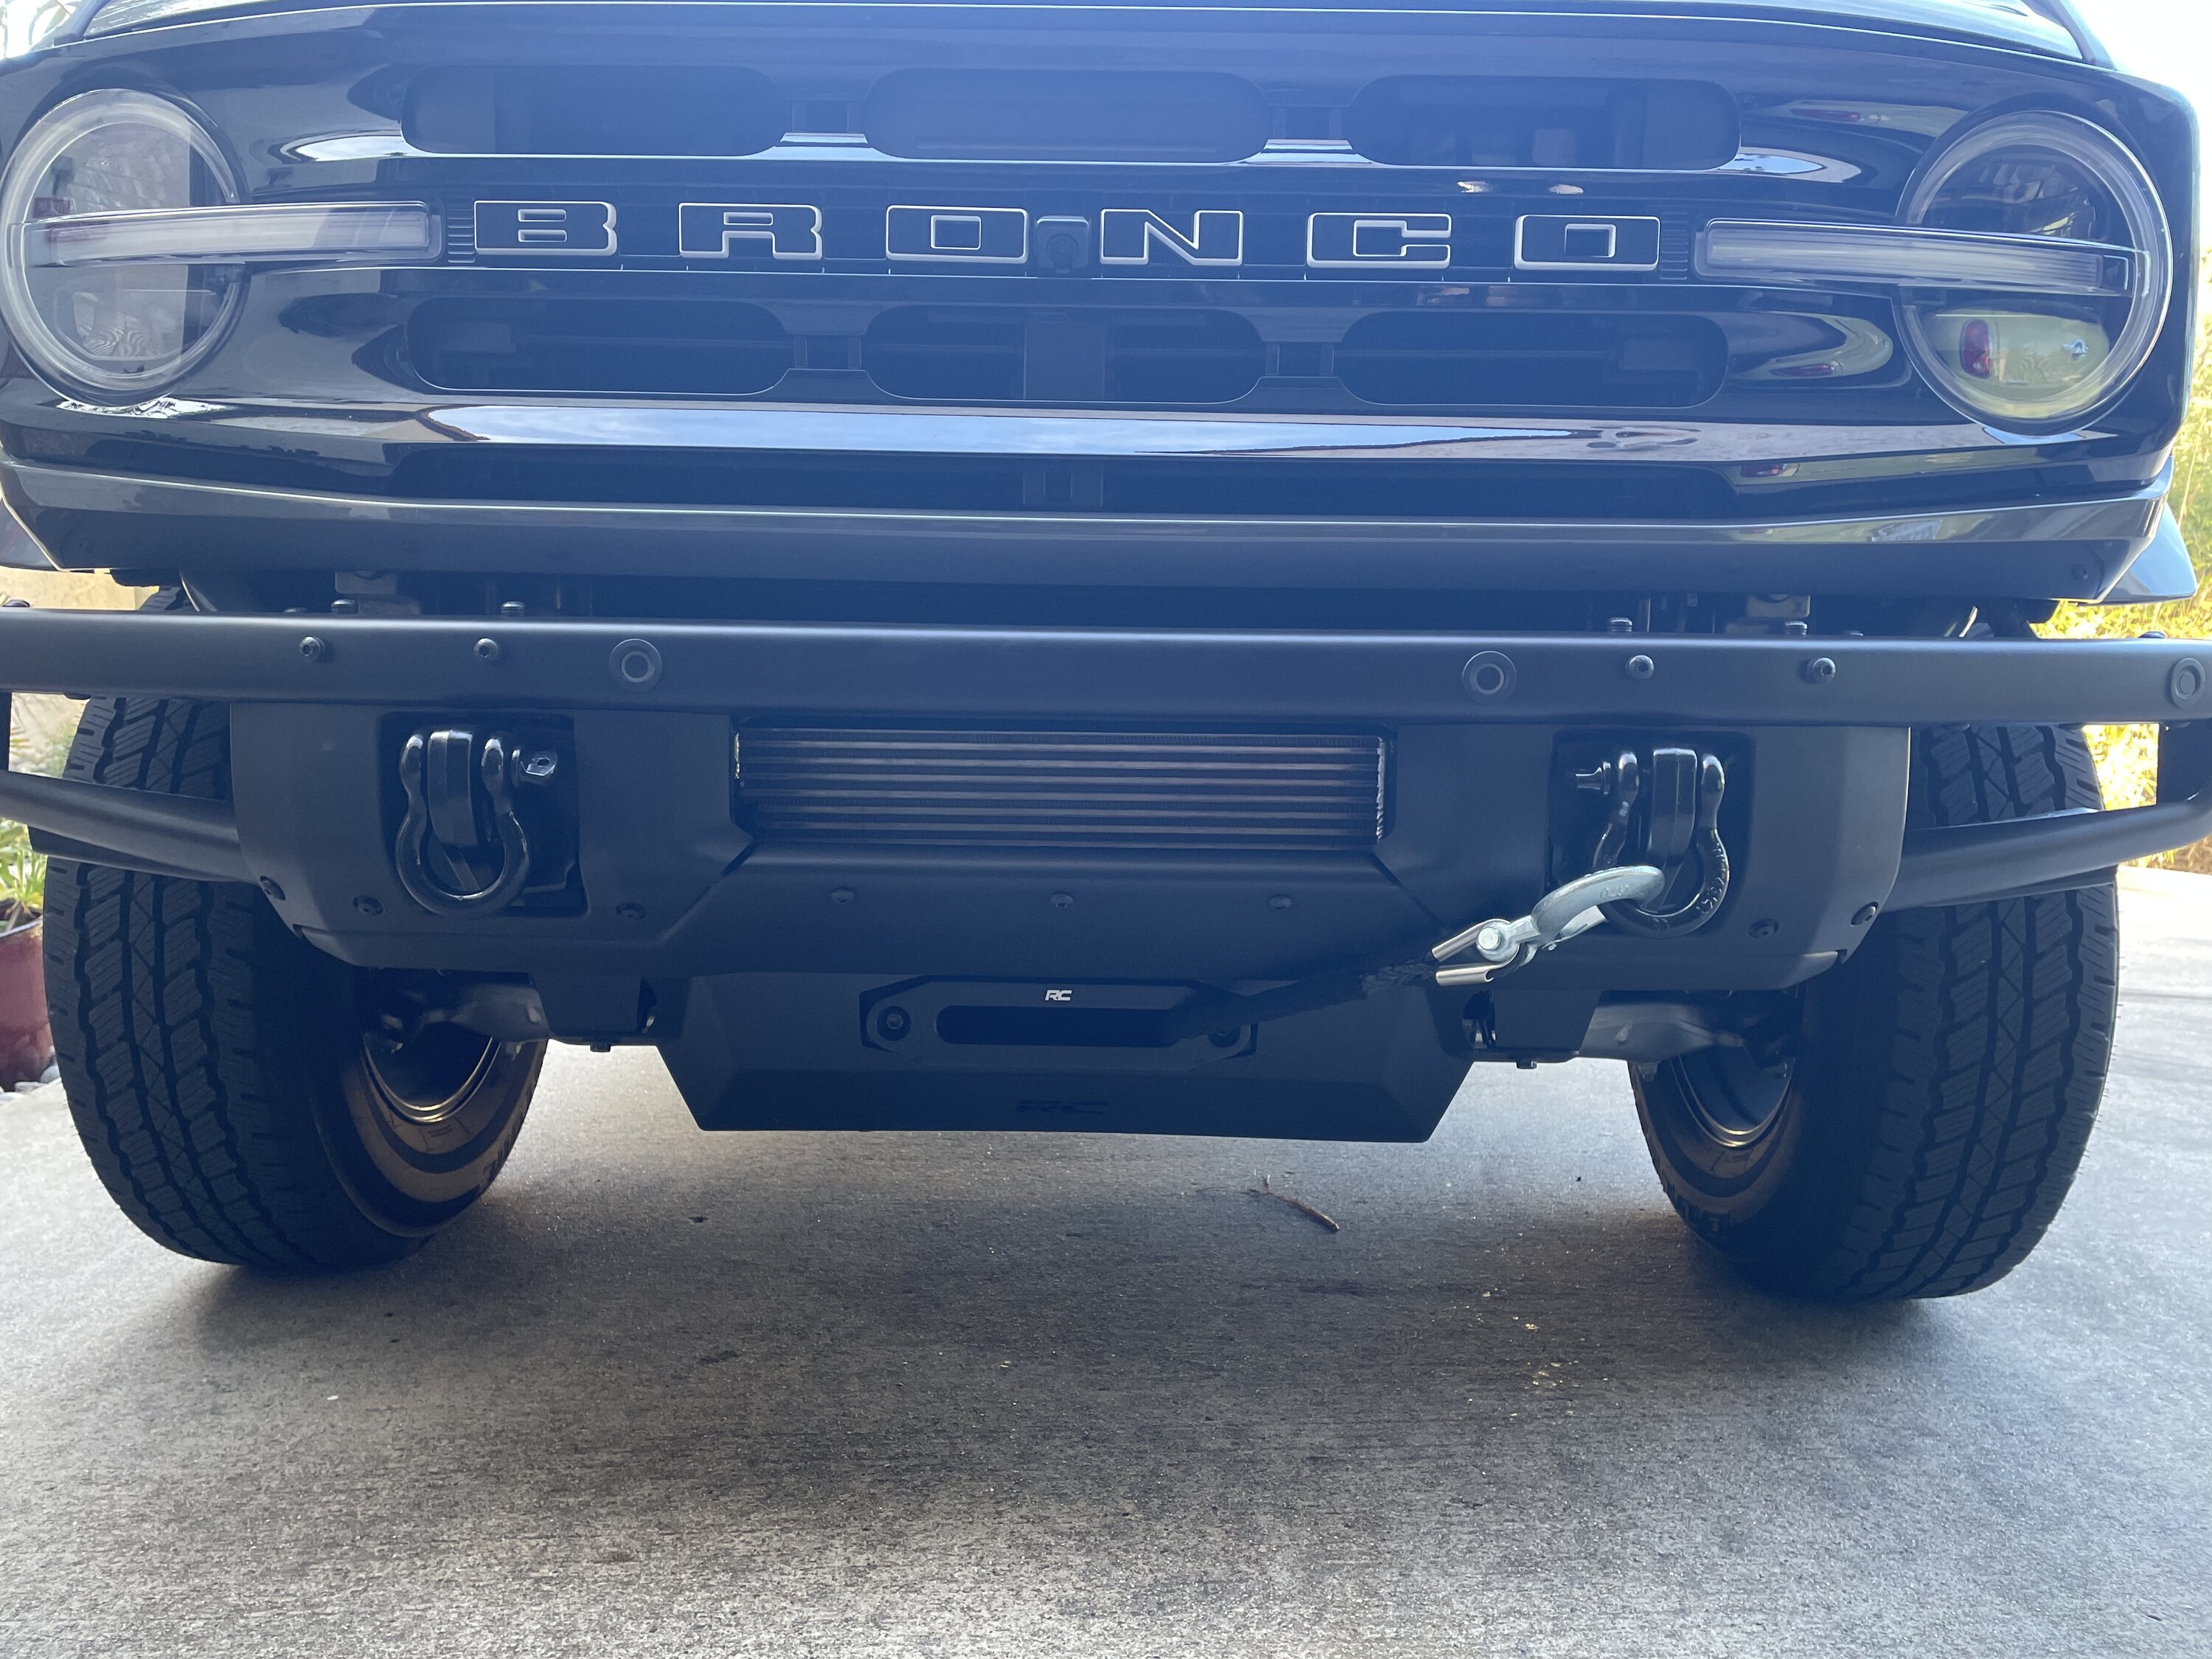 Ford Bronco New Whipple Mega Cooler Intercooler Upgrade for the 2.7L Bronco. Info and Pics Inside!! 95F0CC17-780C-4C82-BC86-8B7497F7C9E0